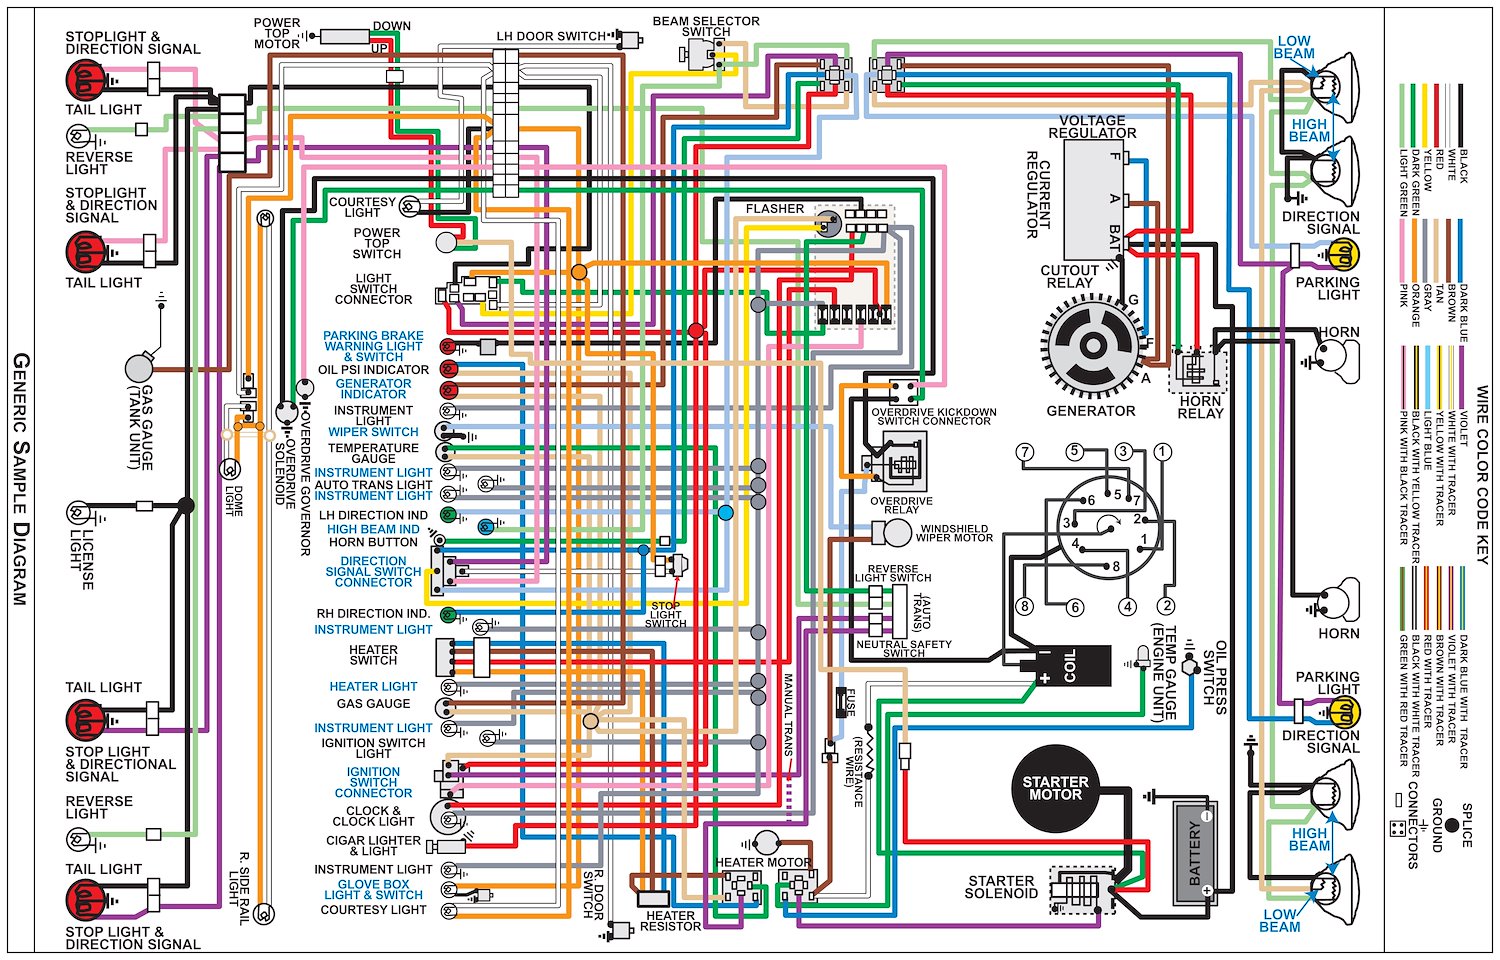 Wiring Diagram for 1974 Dodge Challenger with Rallye